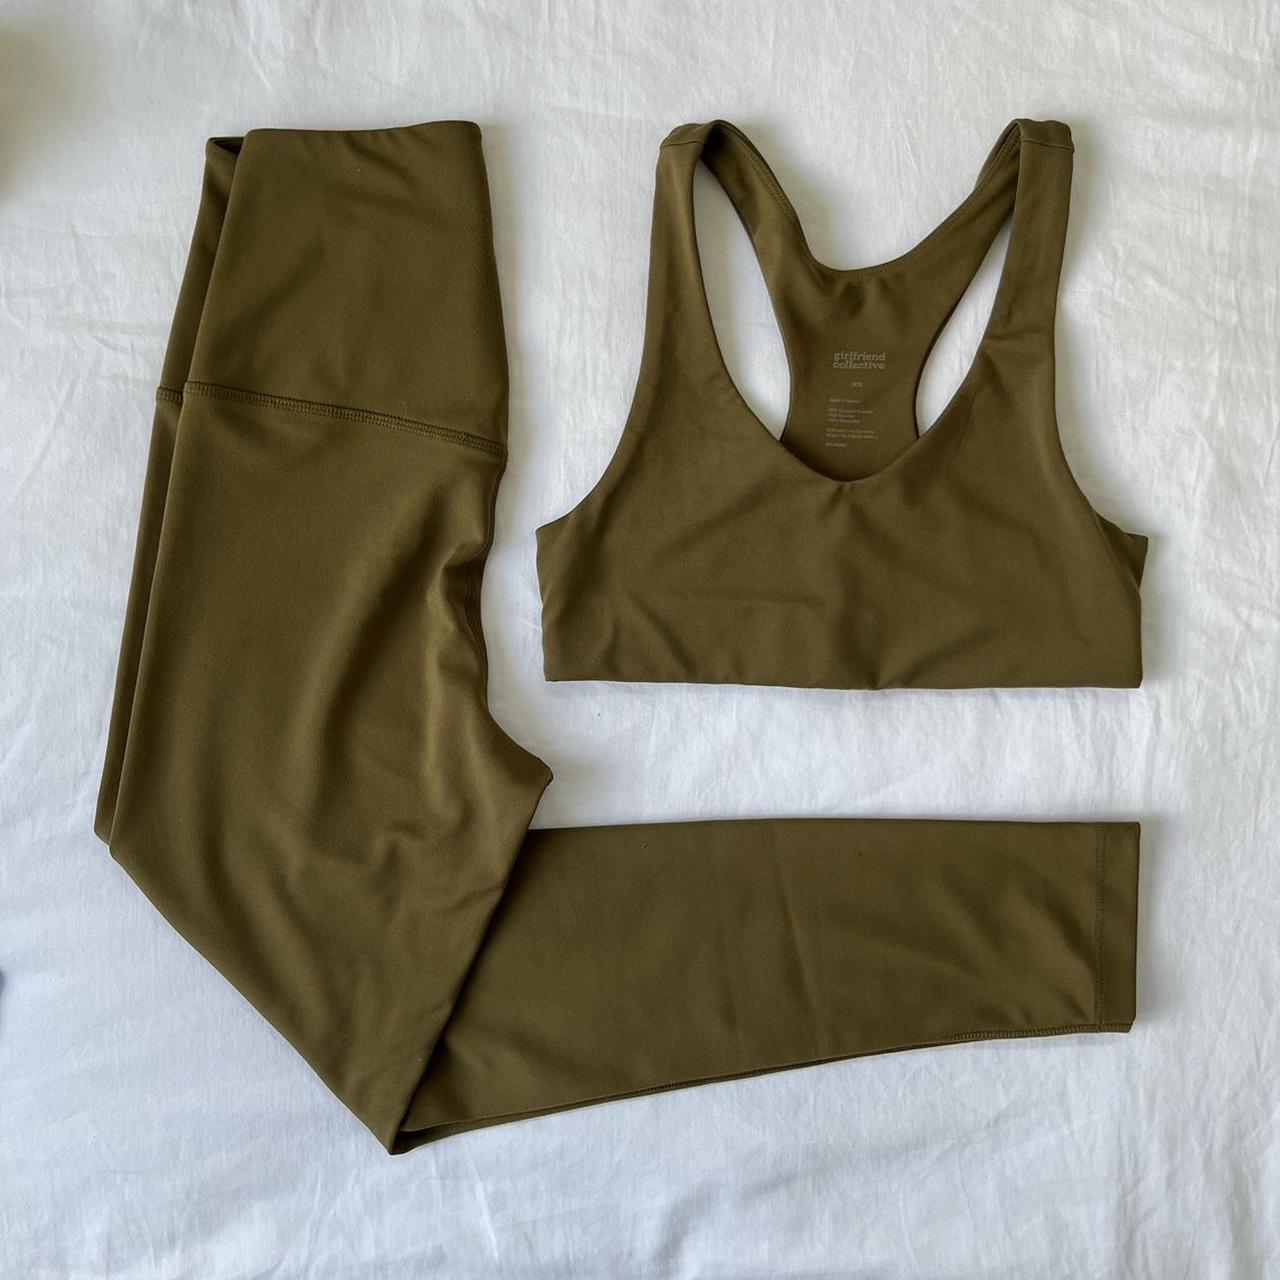 Girlfriend collective leggings in the globe color - Depop